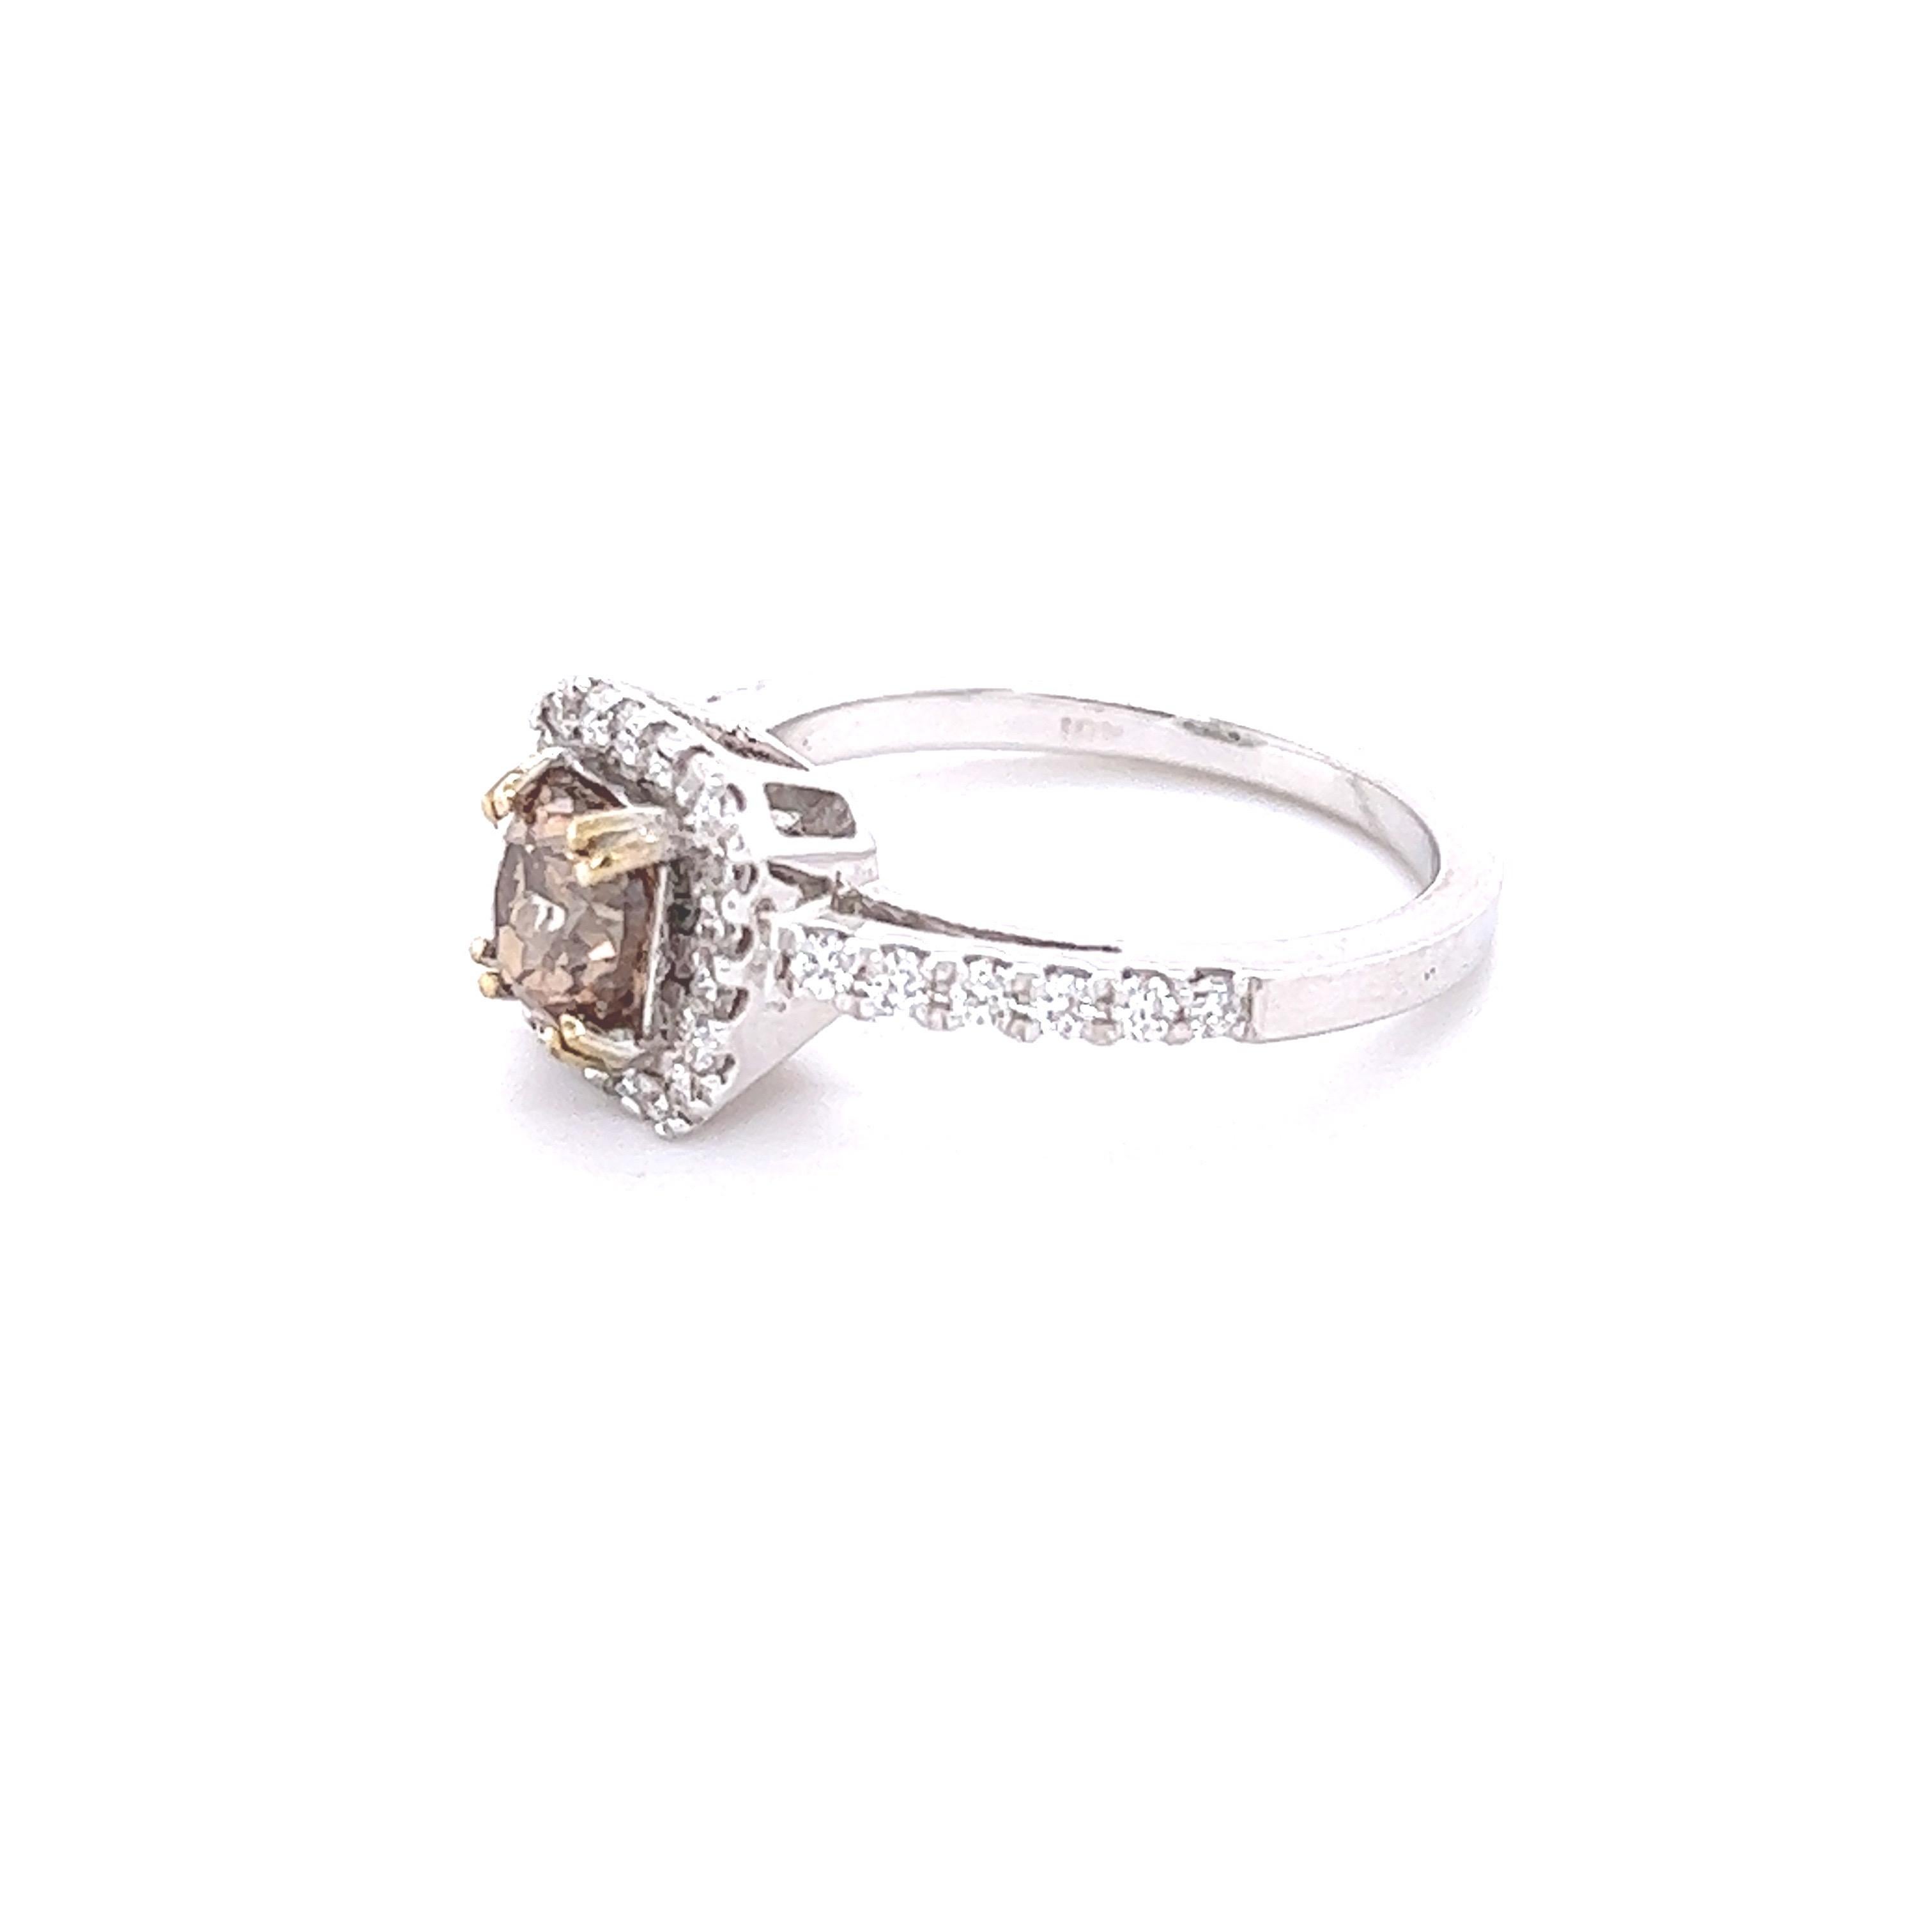 This ring has a Natural Cushion Cut Champagne Brown Diamond that weighs 1.02 carats and it is surrounded by 32 Round Cut White Diamonds that weigh 0.36 carats. Clarity: VS, Color: H
The center champagne diamond measures at 6 mm x 5 mm. 
The total